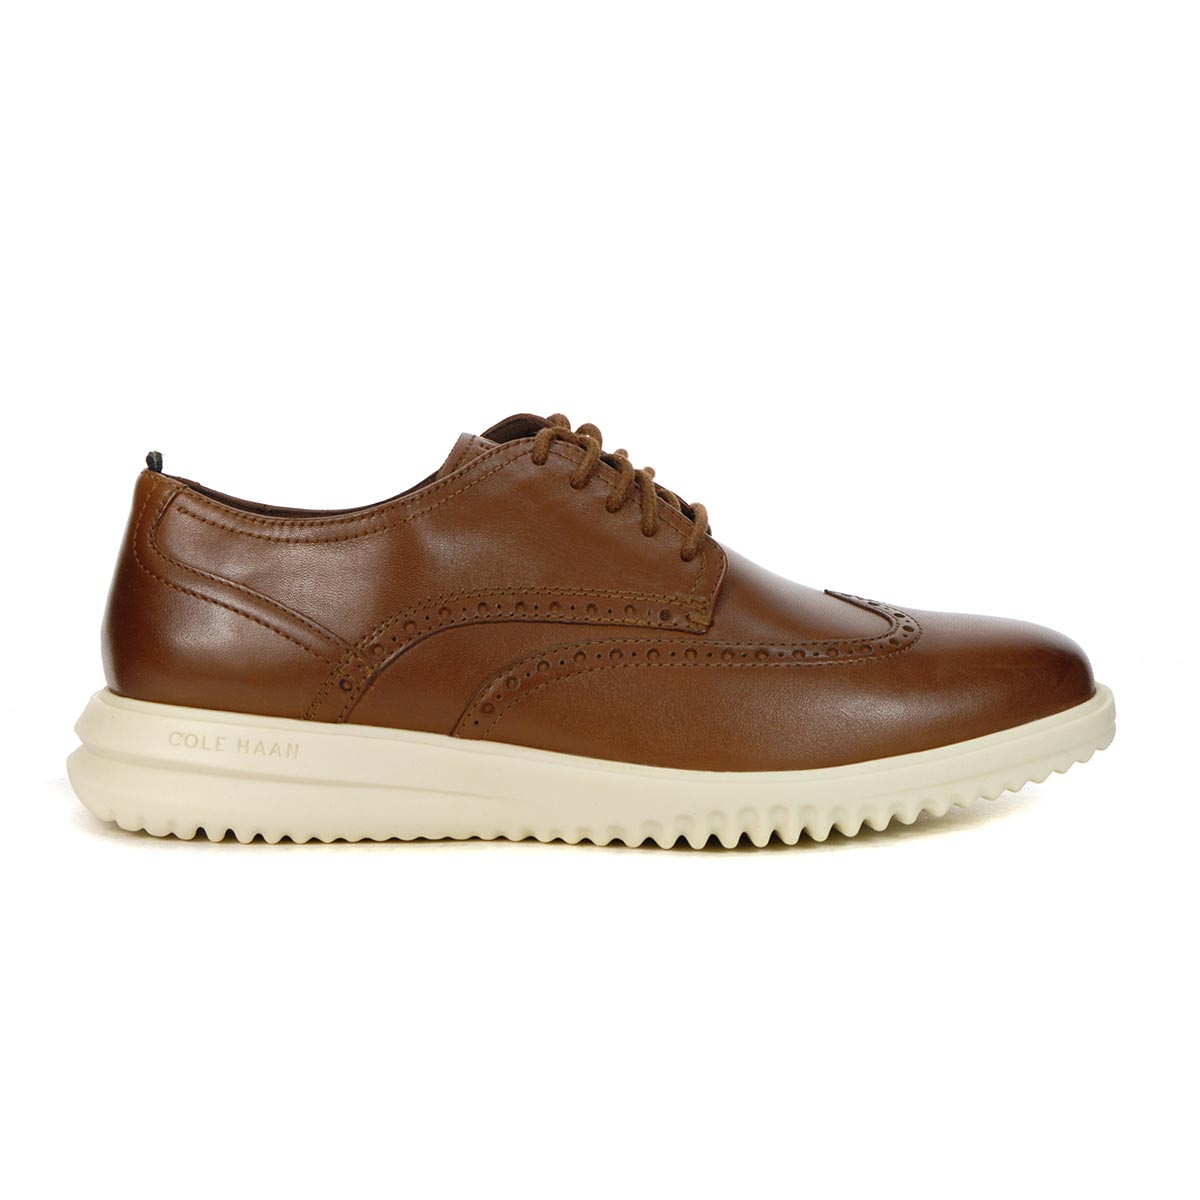 Cole Haan Men's Grand+ Tan/Ivory Leather Wingtip Oxfords - WOOKI.COM